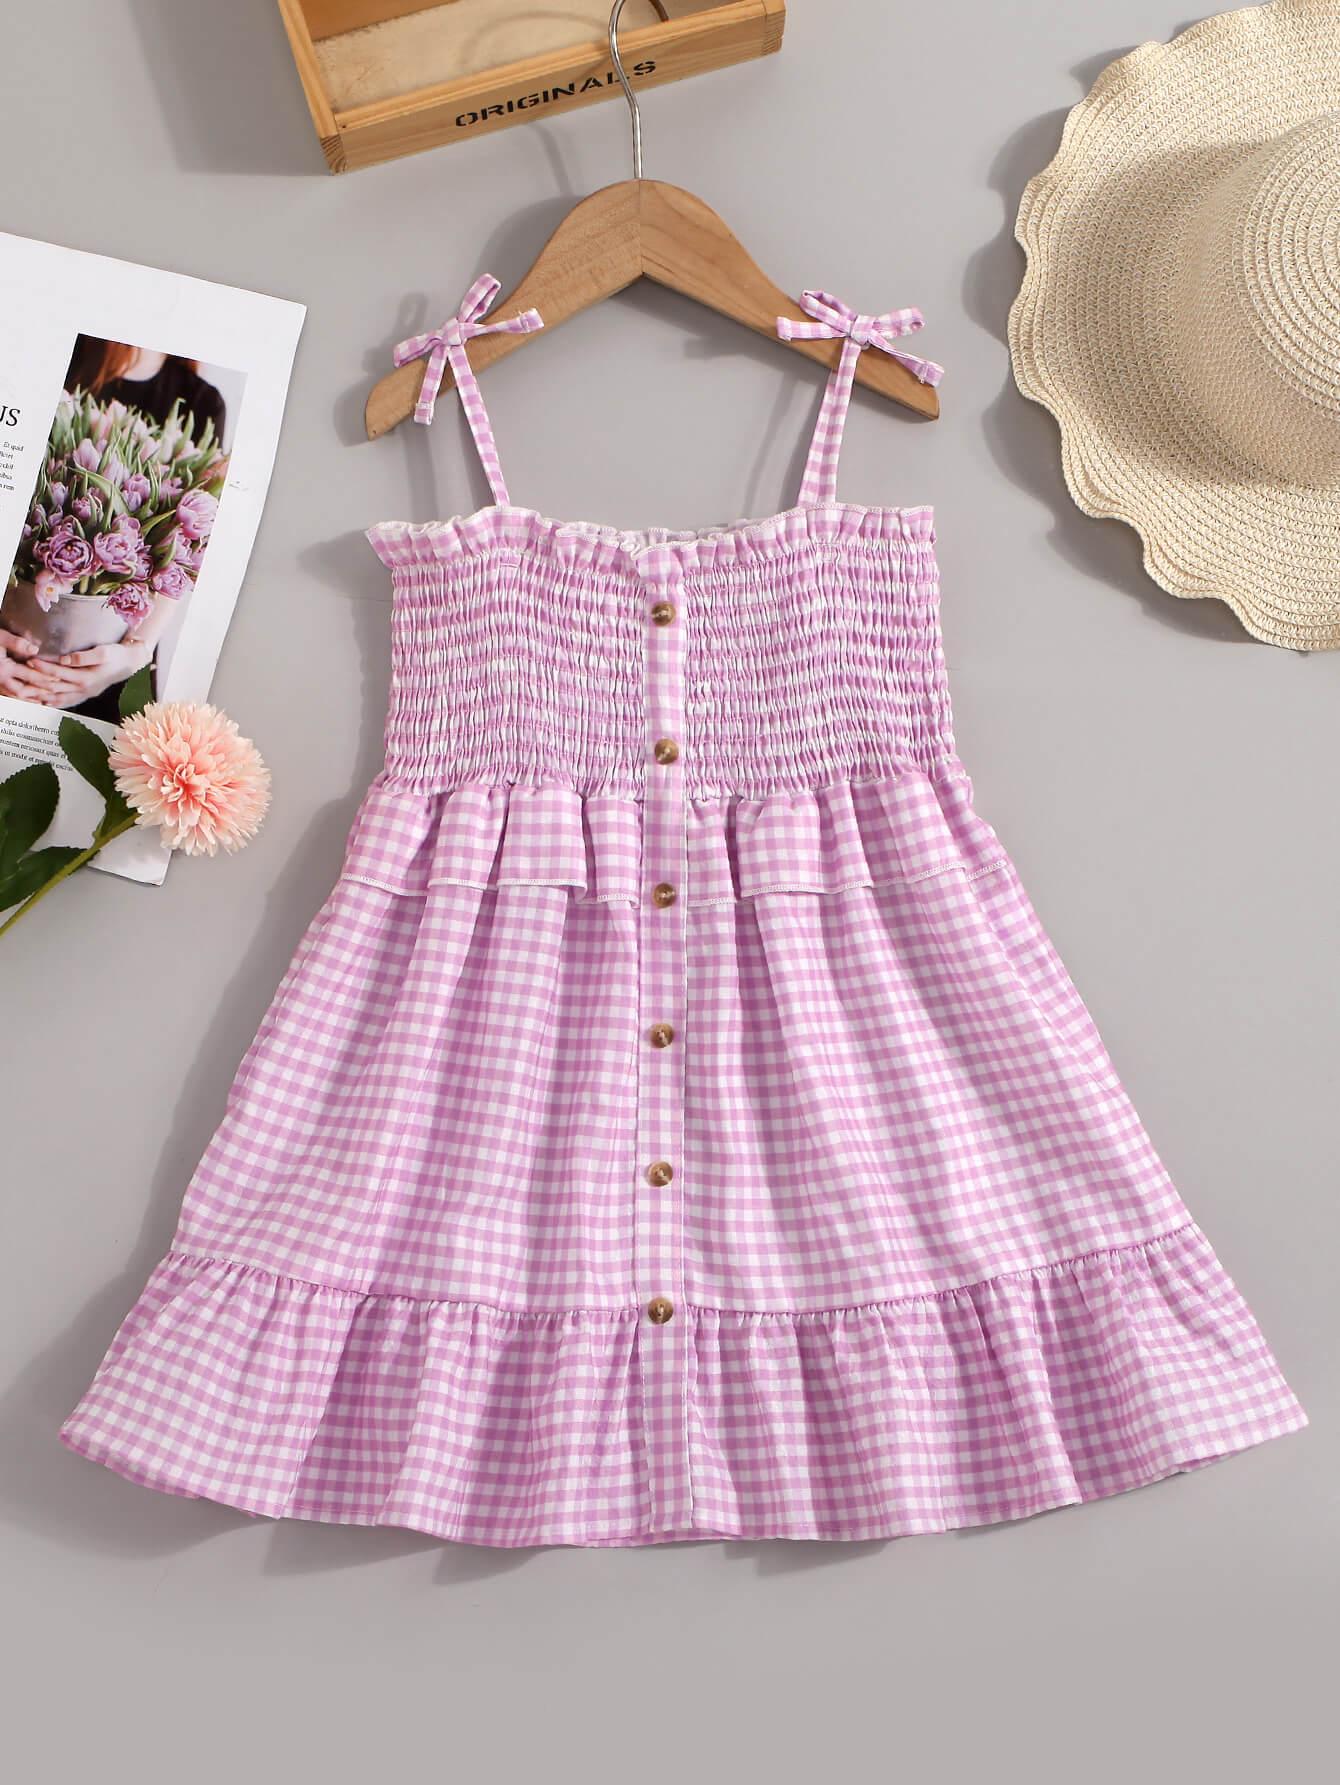 Girls Gingham Decorative Button Smocked Dress 1y-6y - Fashion Girl Online Store